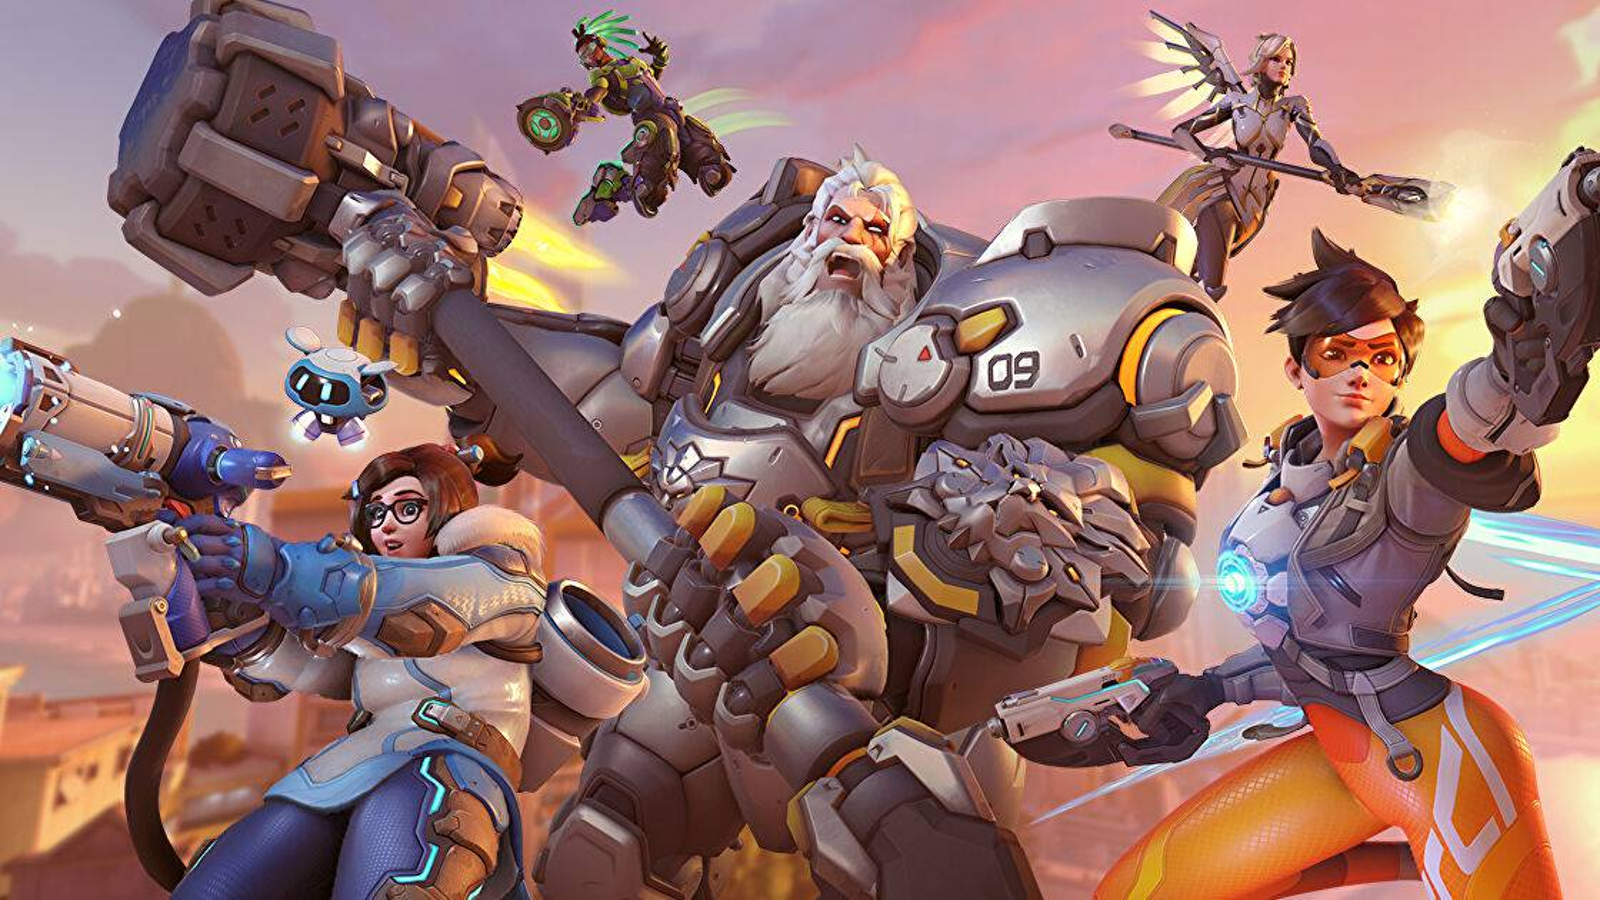 Overwatch 2 now available on Steam Deck